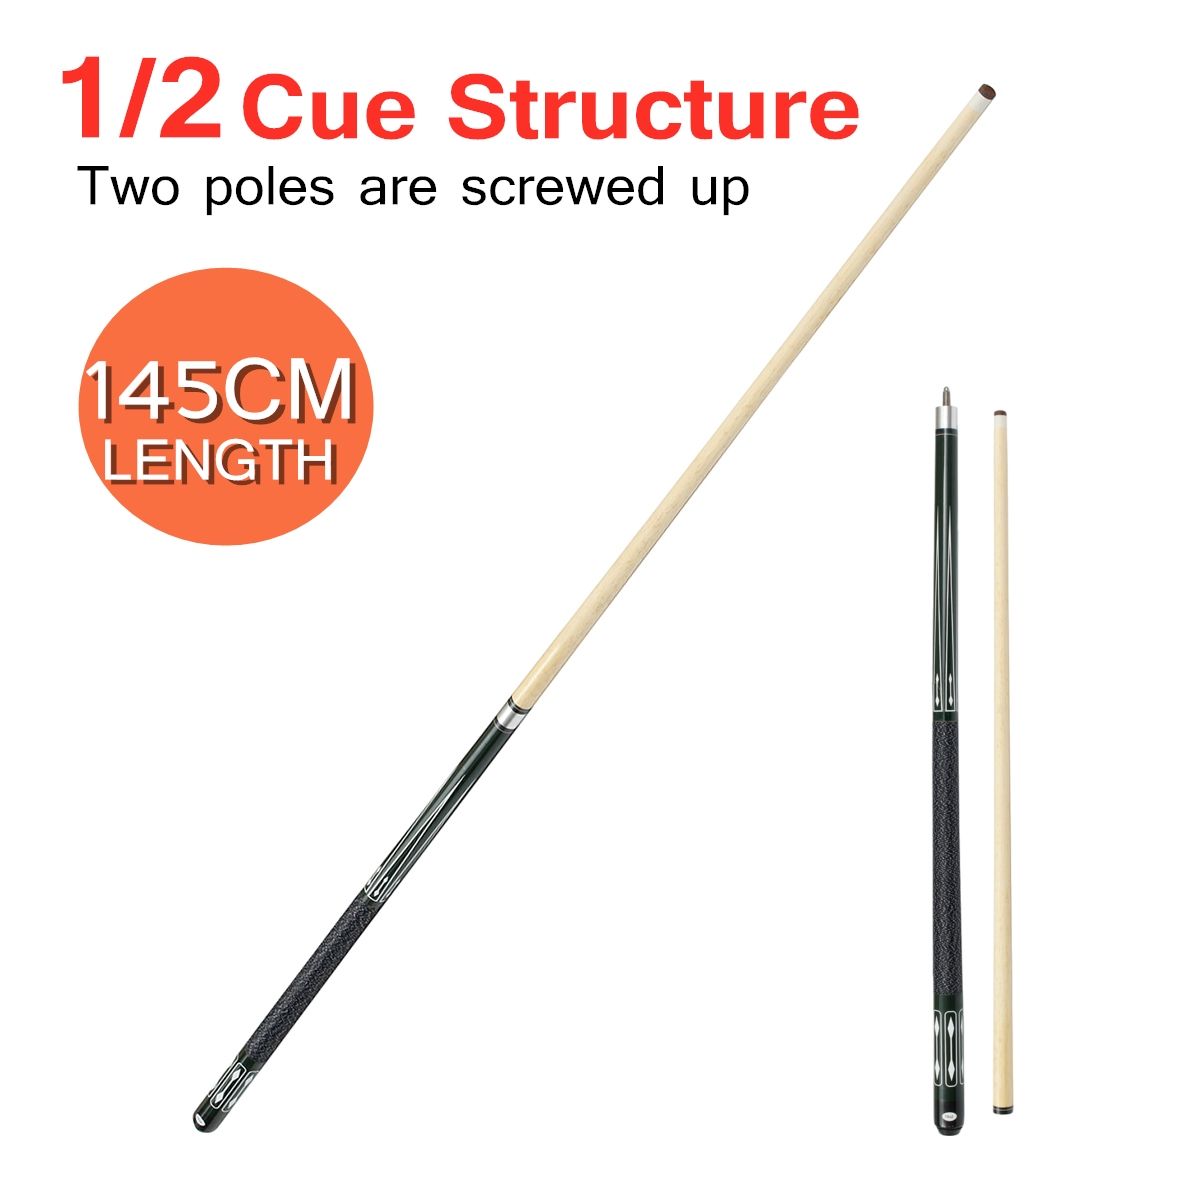 57-Wooden-Pool-Snooker-2-Piece-Jointed-Cue-Stick-Billiard-Game-Rack-Club-Gift-1639769